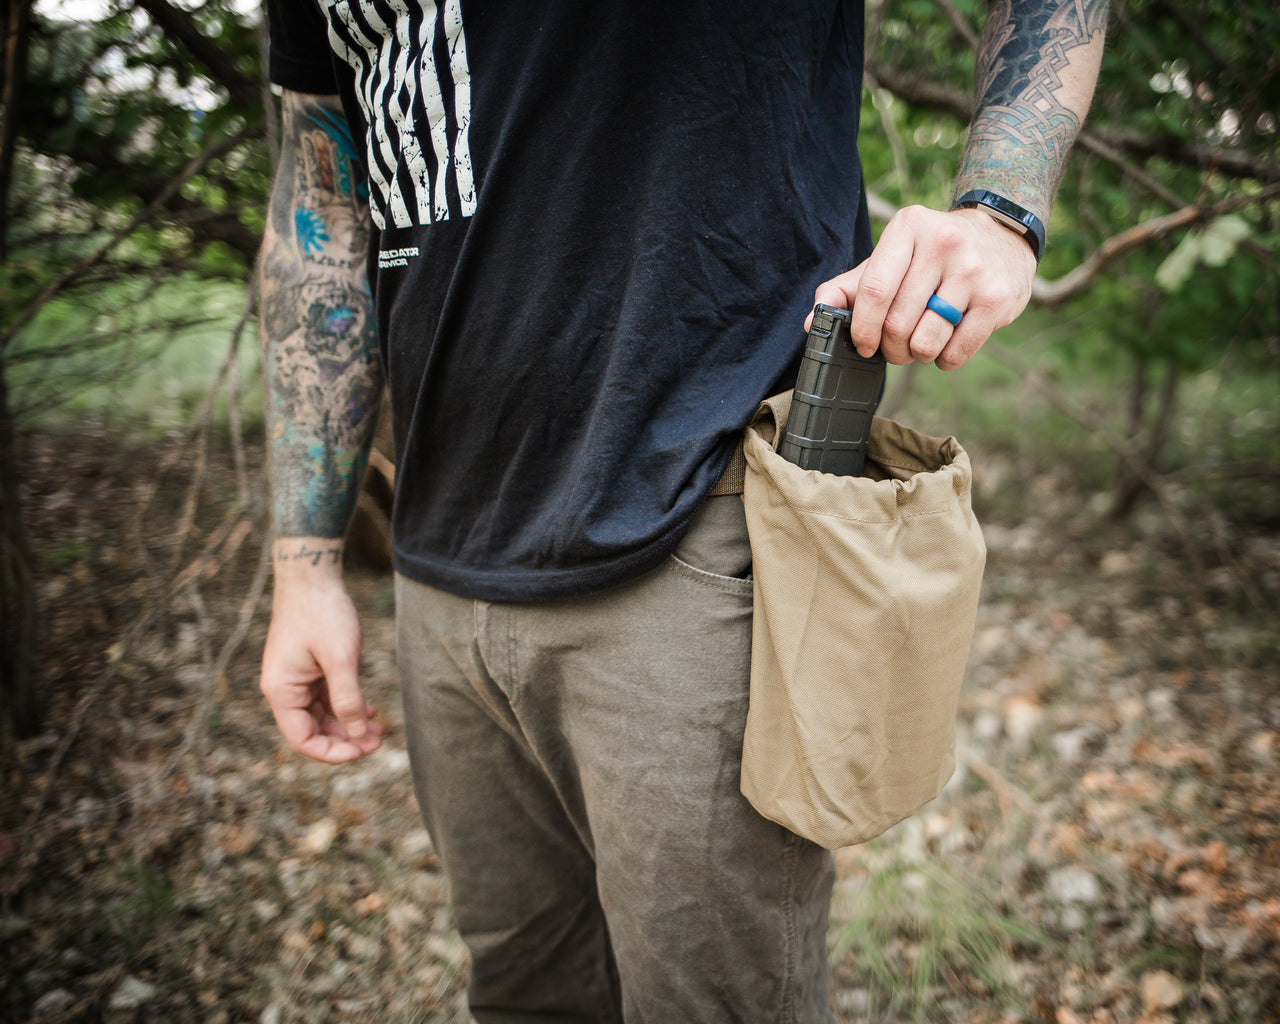 Man with tattooed arms holding a black water bottle in a Predator Armor Dump Pouch attached to his belt, standing in a wooded area.